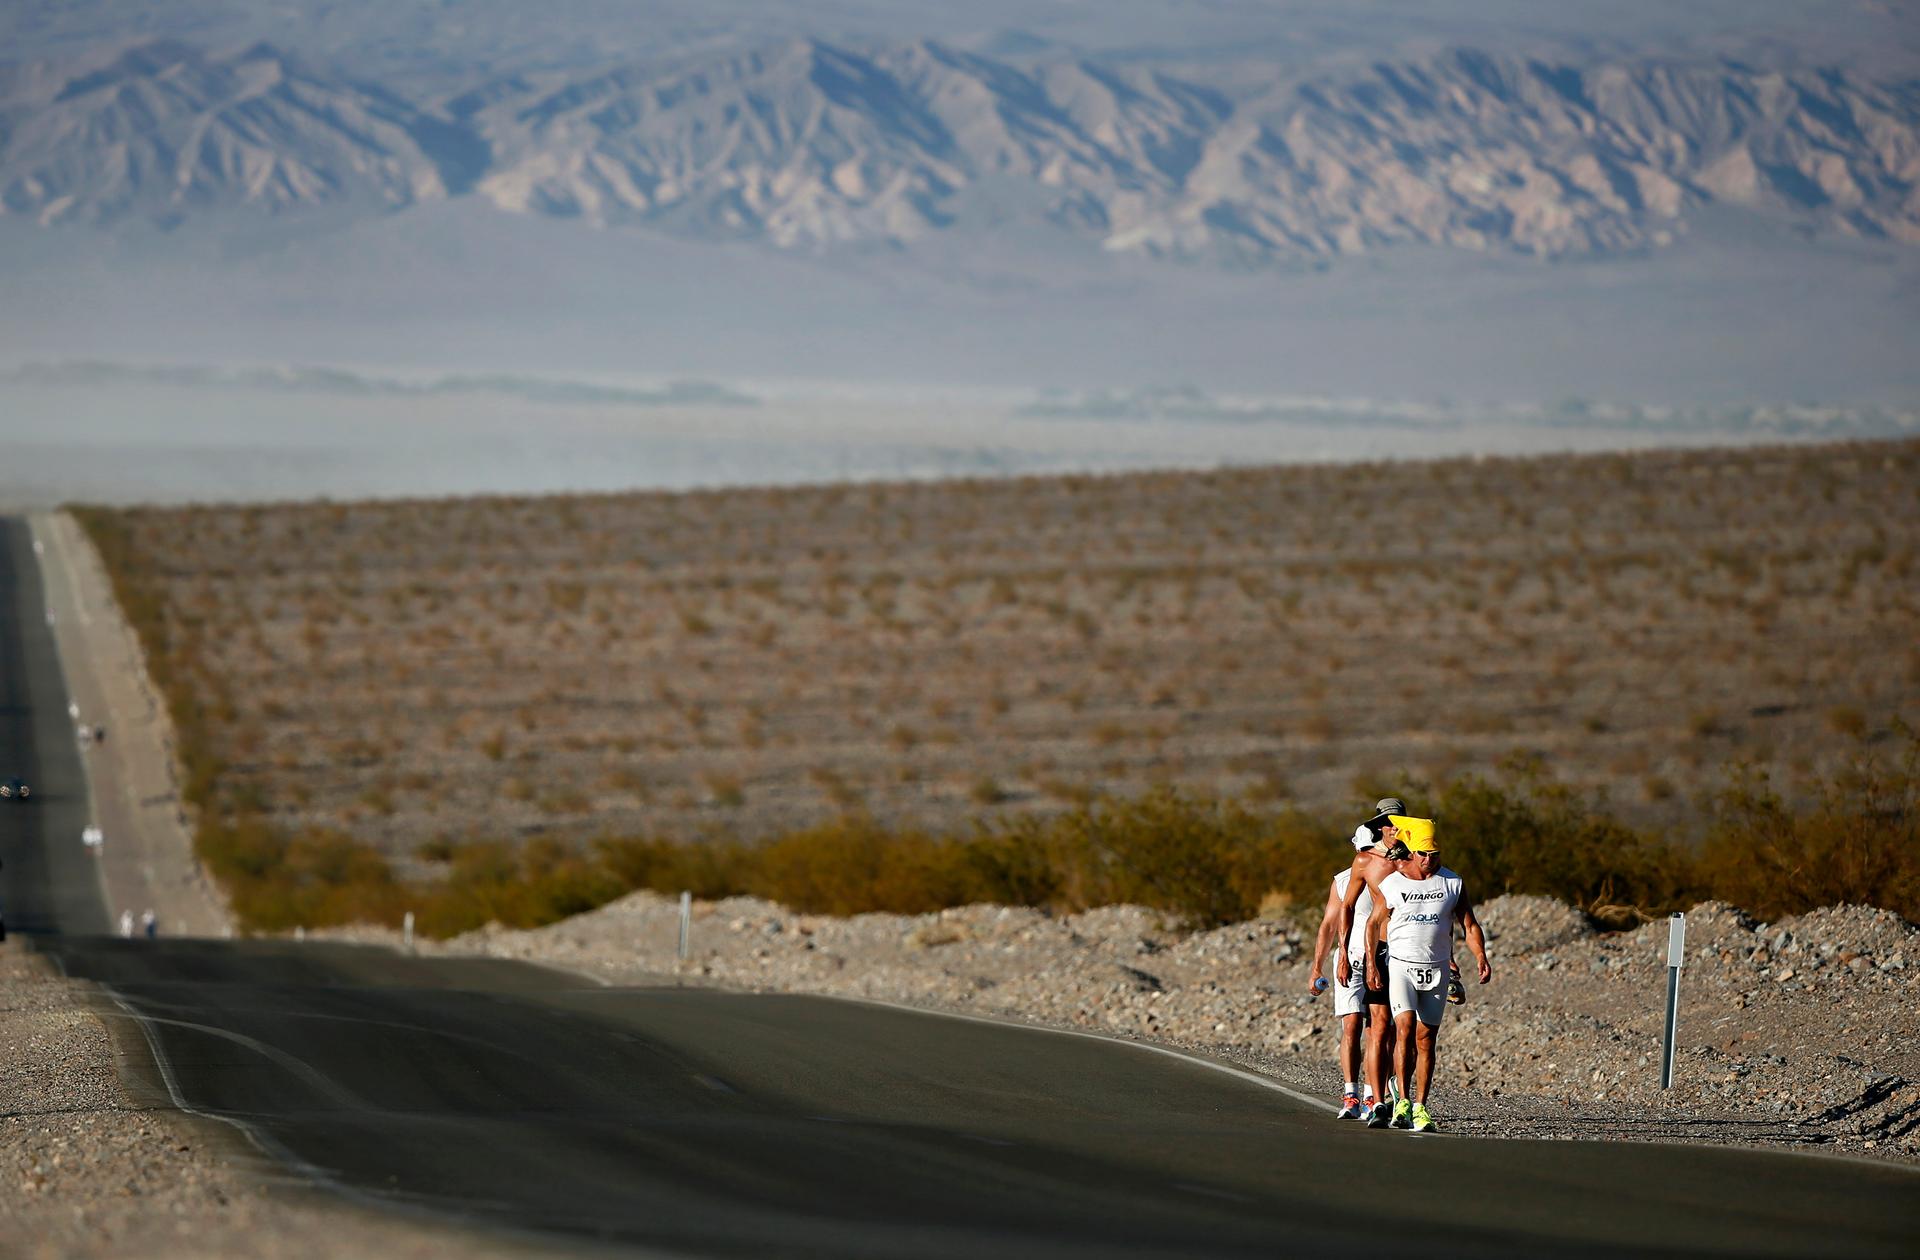 Competitors run in the 2013 Badwater Ultramarathon in Death Valley National Park, California. The 135-mile (217 km) race, which bills itself as the world's toughest foot race, goes from Death Valley to Mt. Whitney, California. Temperatures can reach 130 d